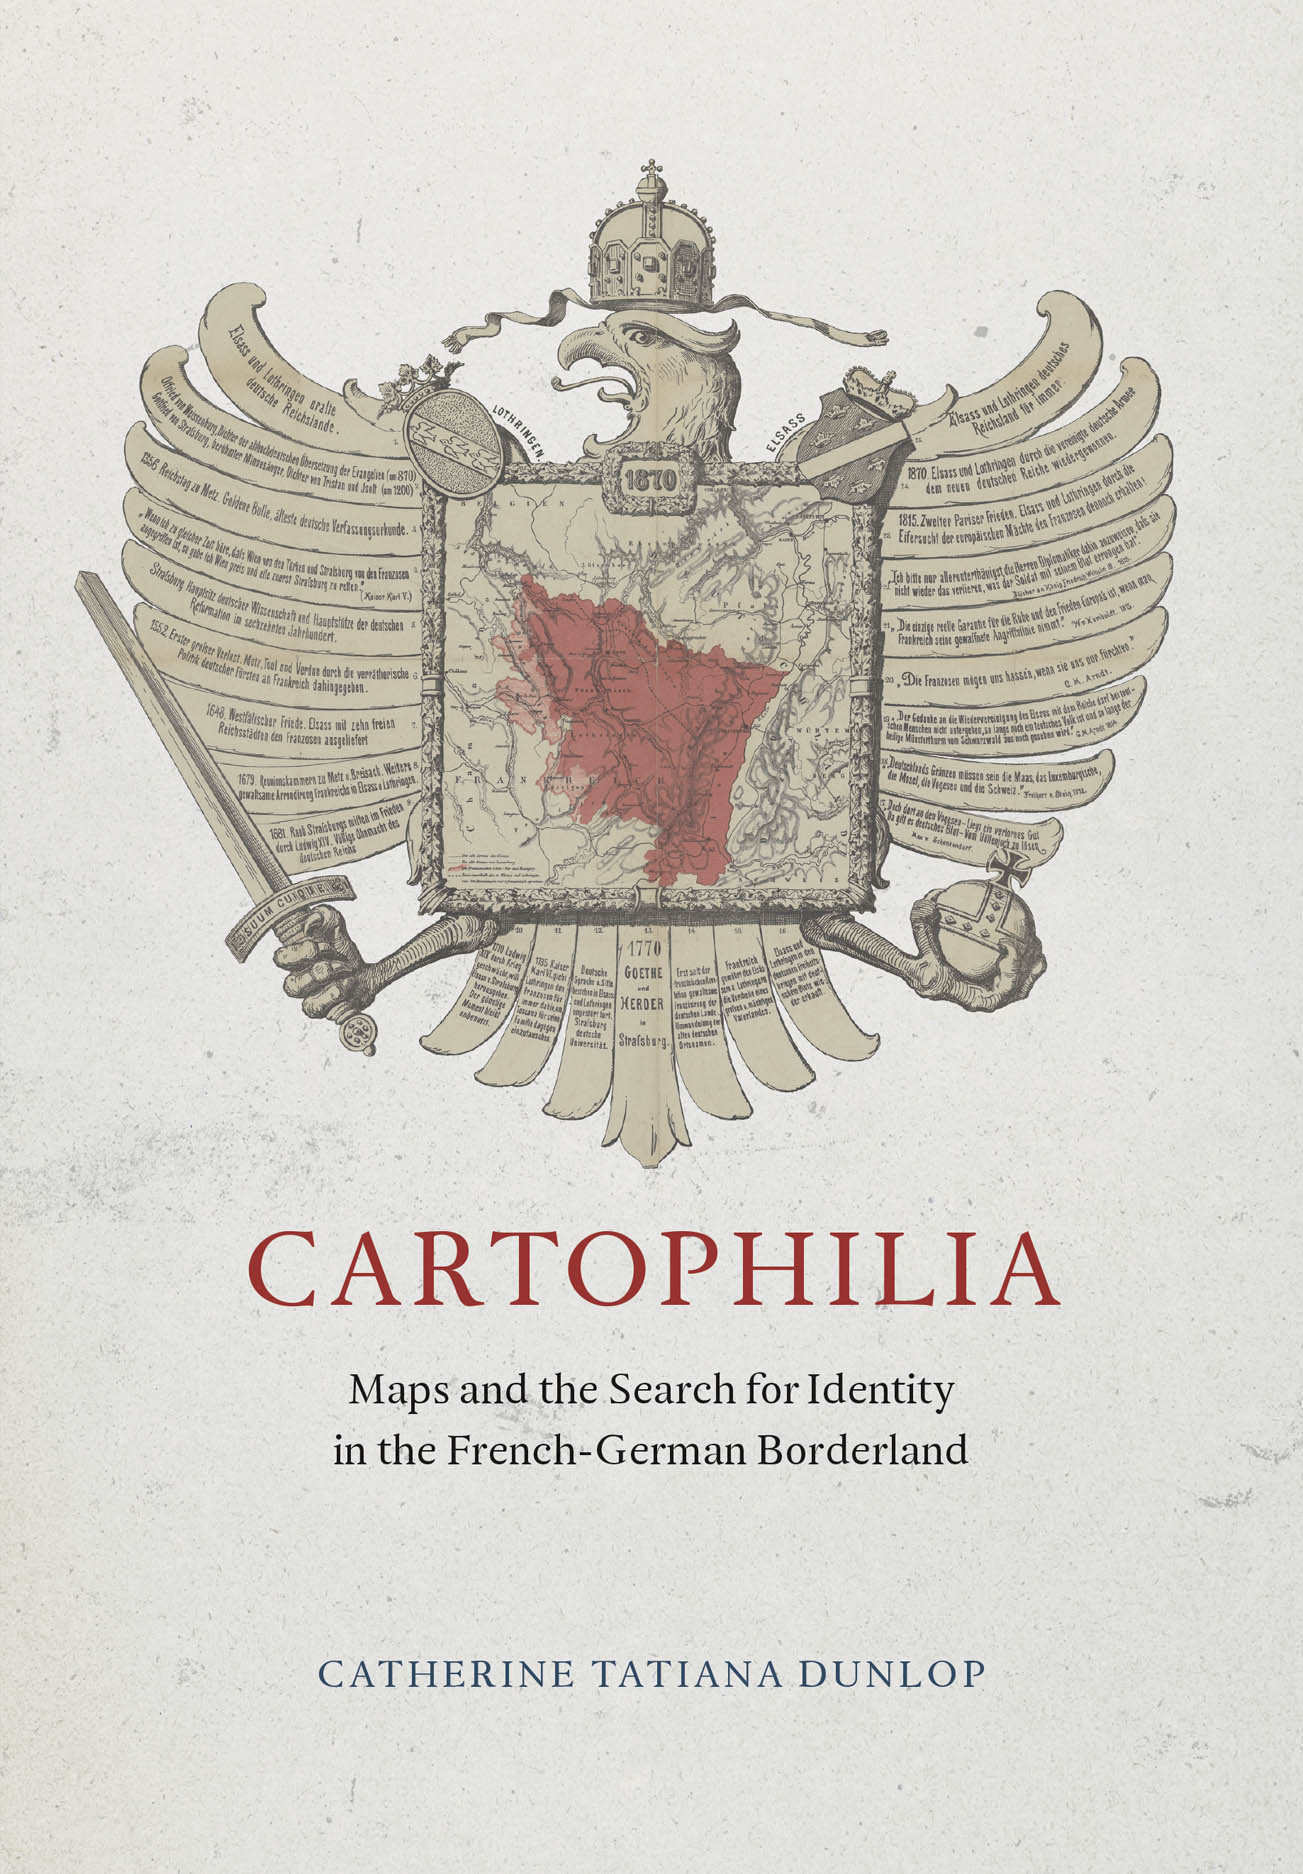 Dunlop the for Borderland, the Cartophilia: and in Identity French-German Maps Search